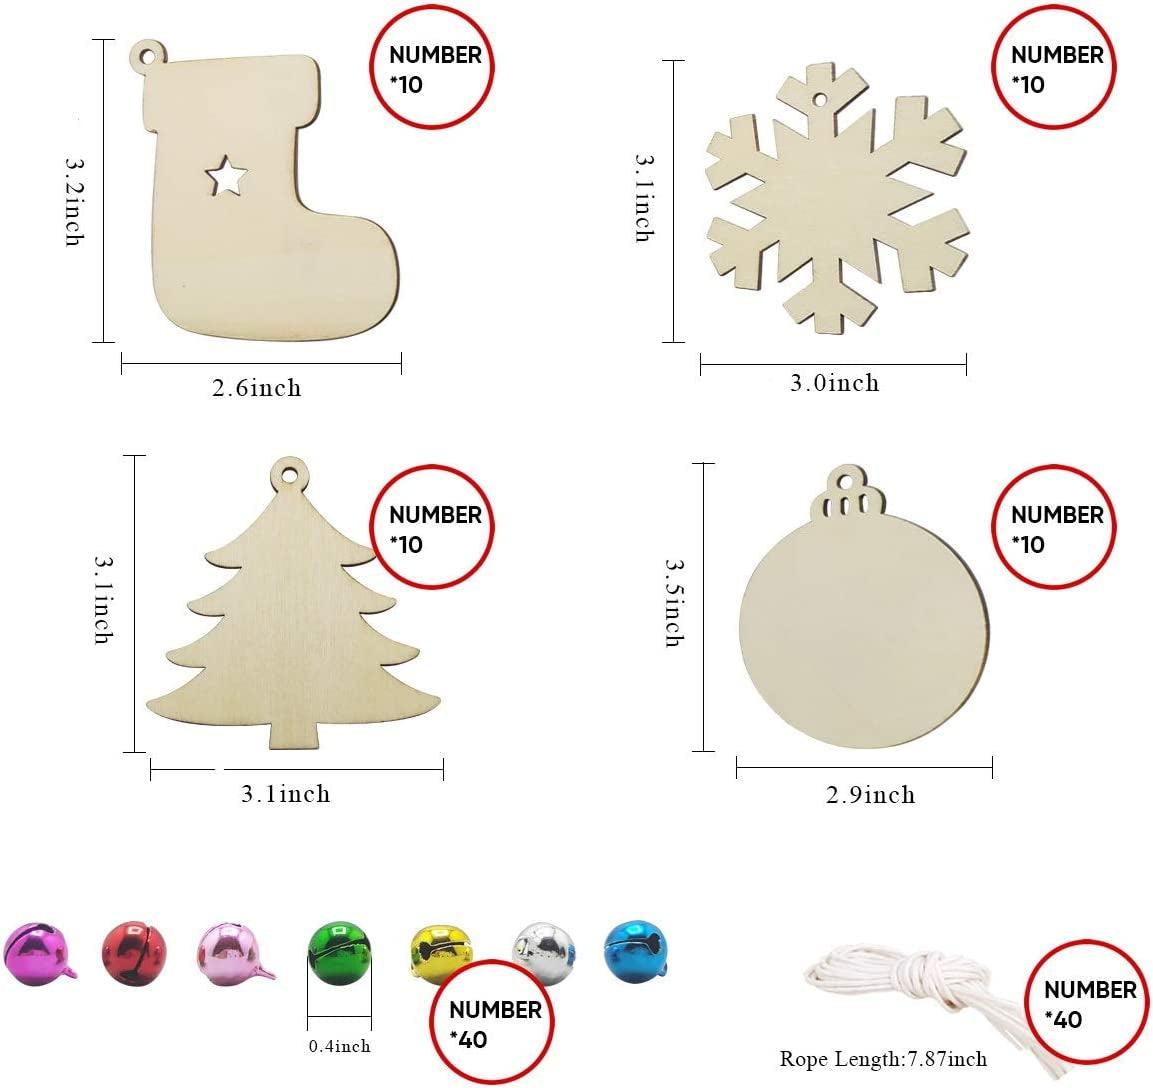 40PCS Christmas Crafts Unfinished Wooden Christmas Ornaments Kit, DIY Ornaments Crafts with 40PCS Colorful Bells and 40PCS Wax Rope - WoodArtSupply